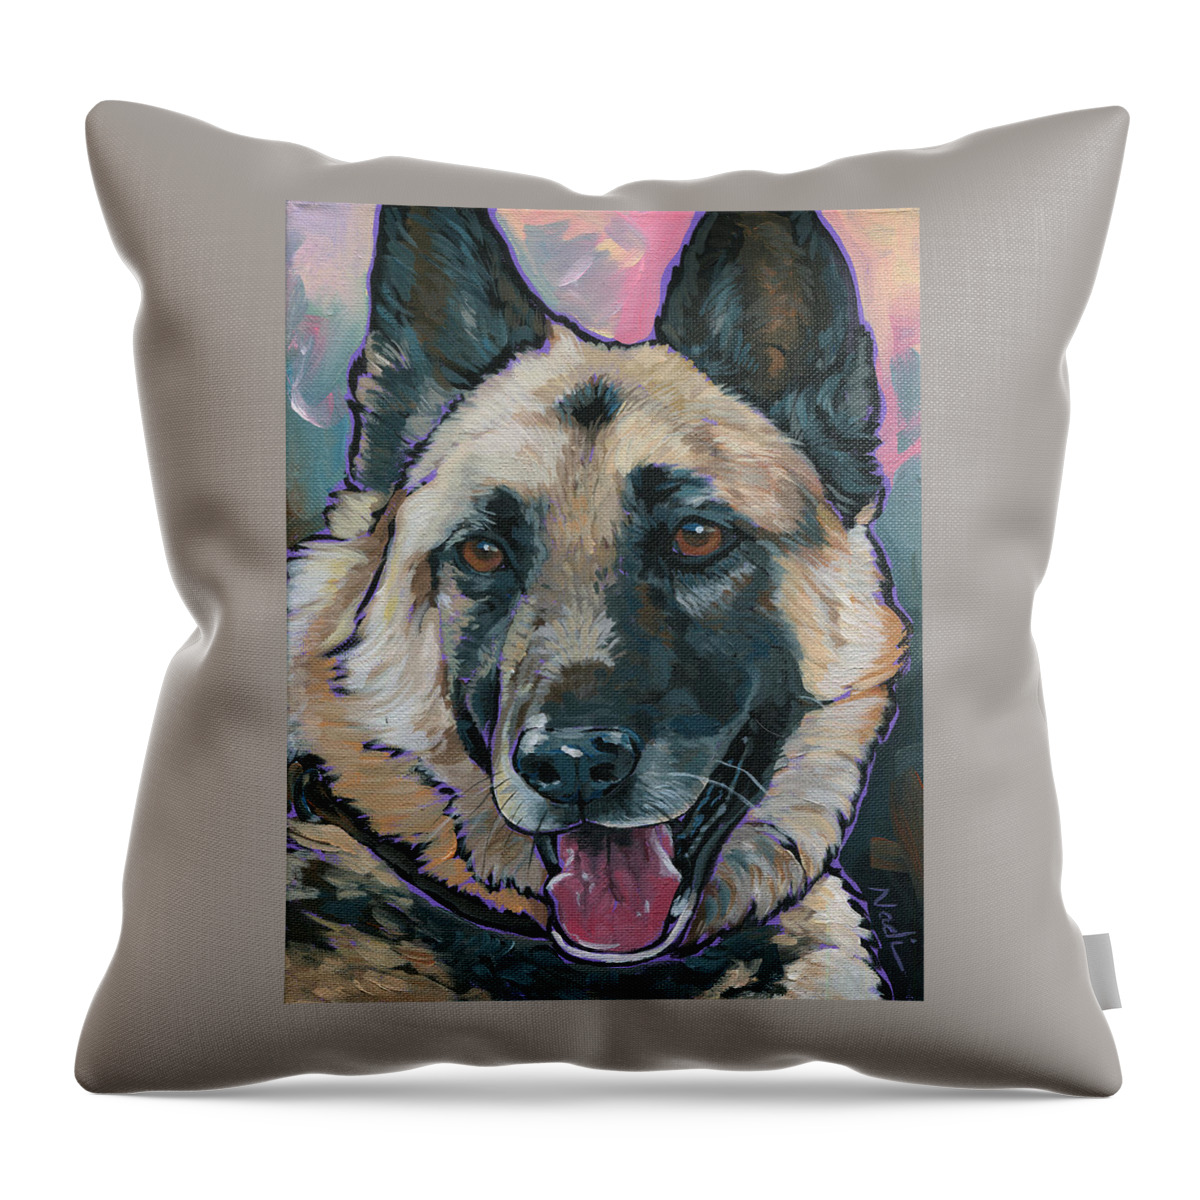 German Shepherd Dog Throw Pillow featuring the painting Maggie by Nadi Spencer